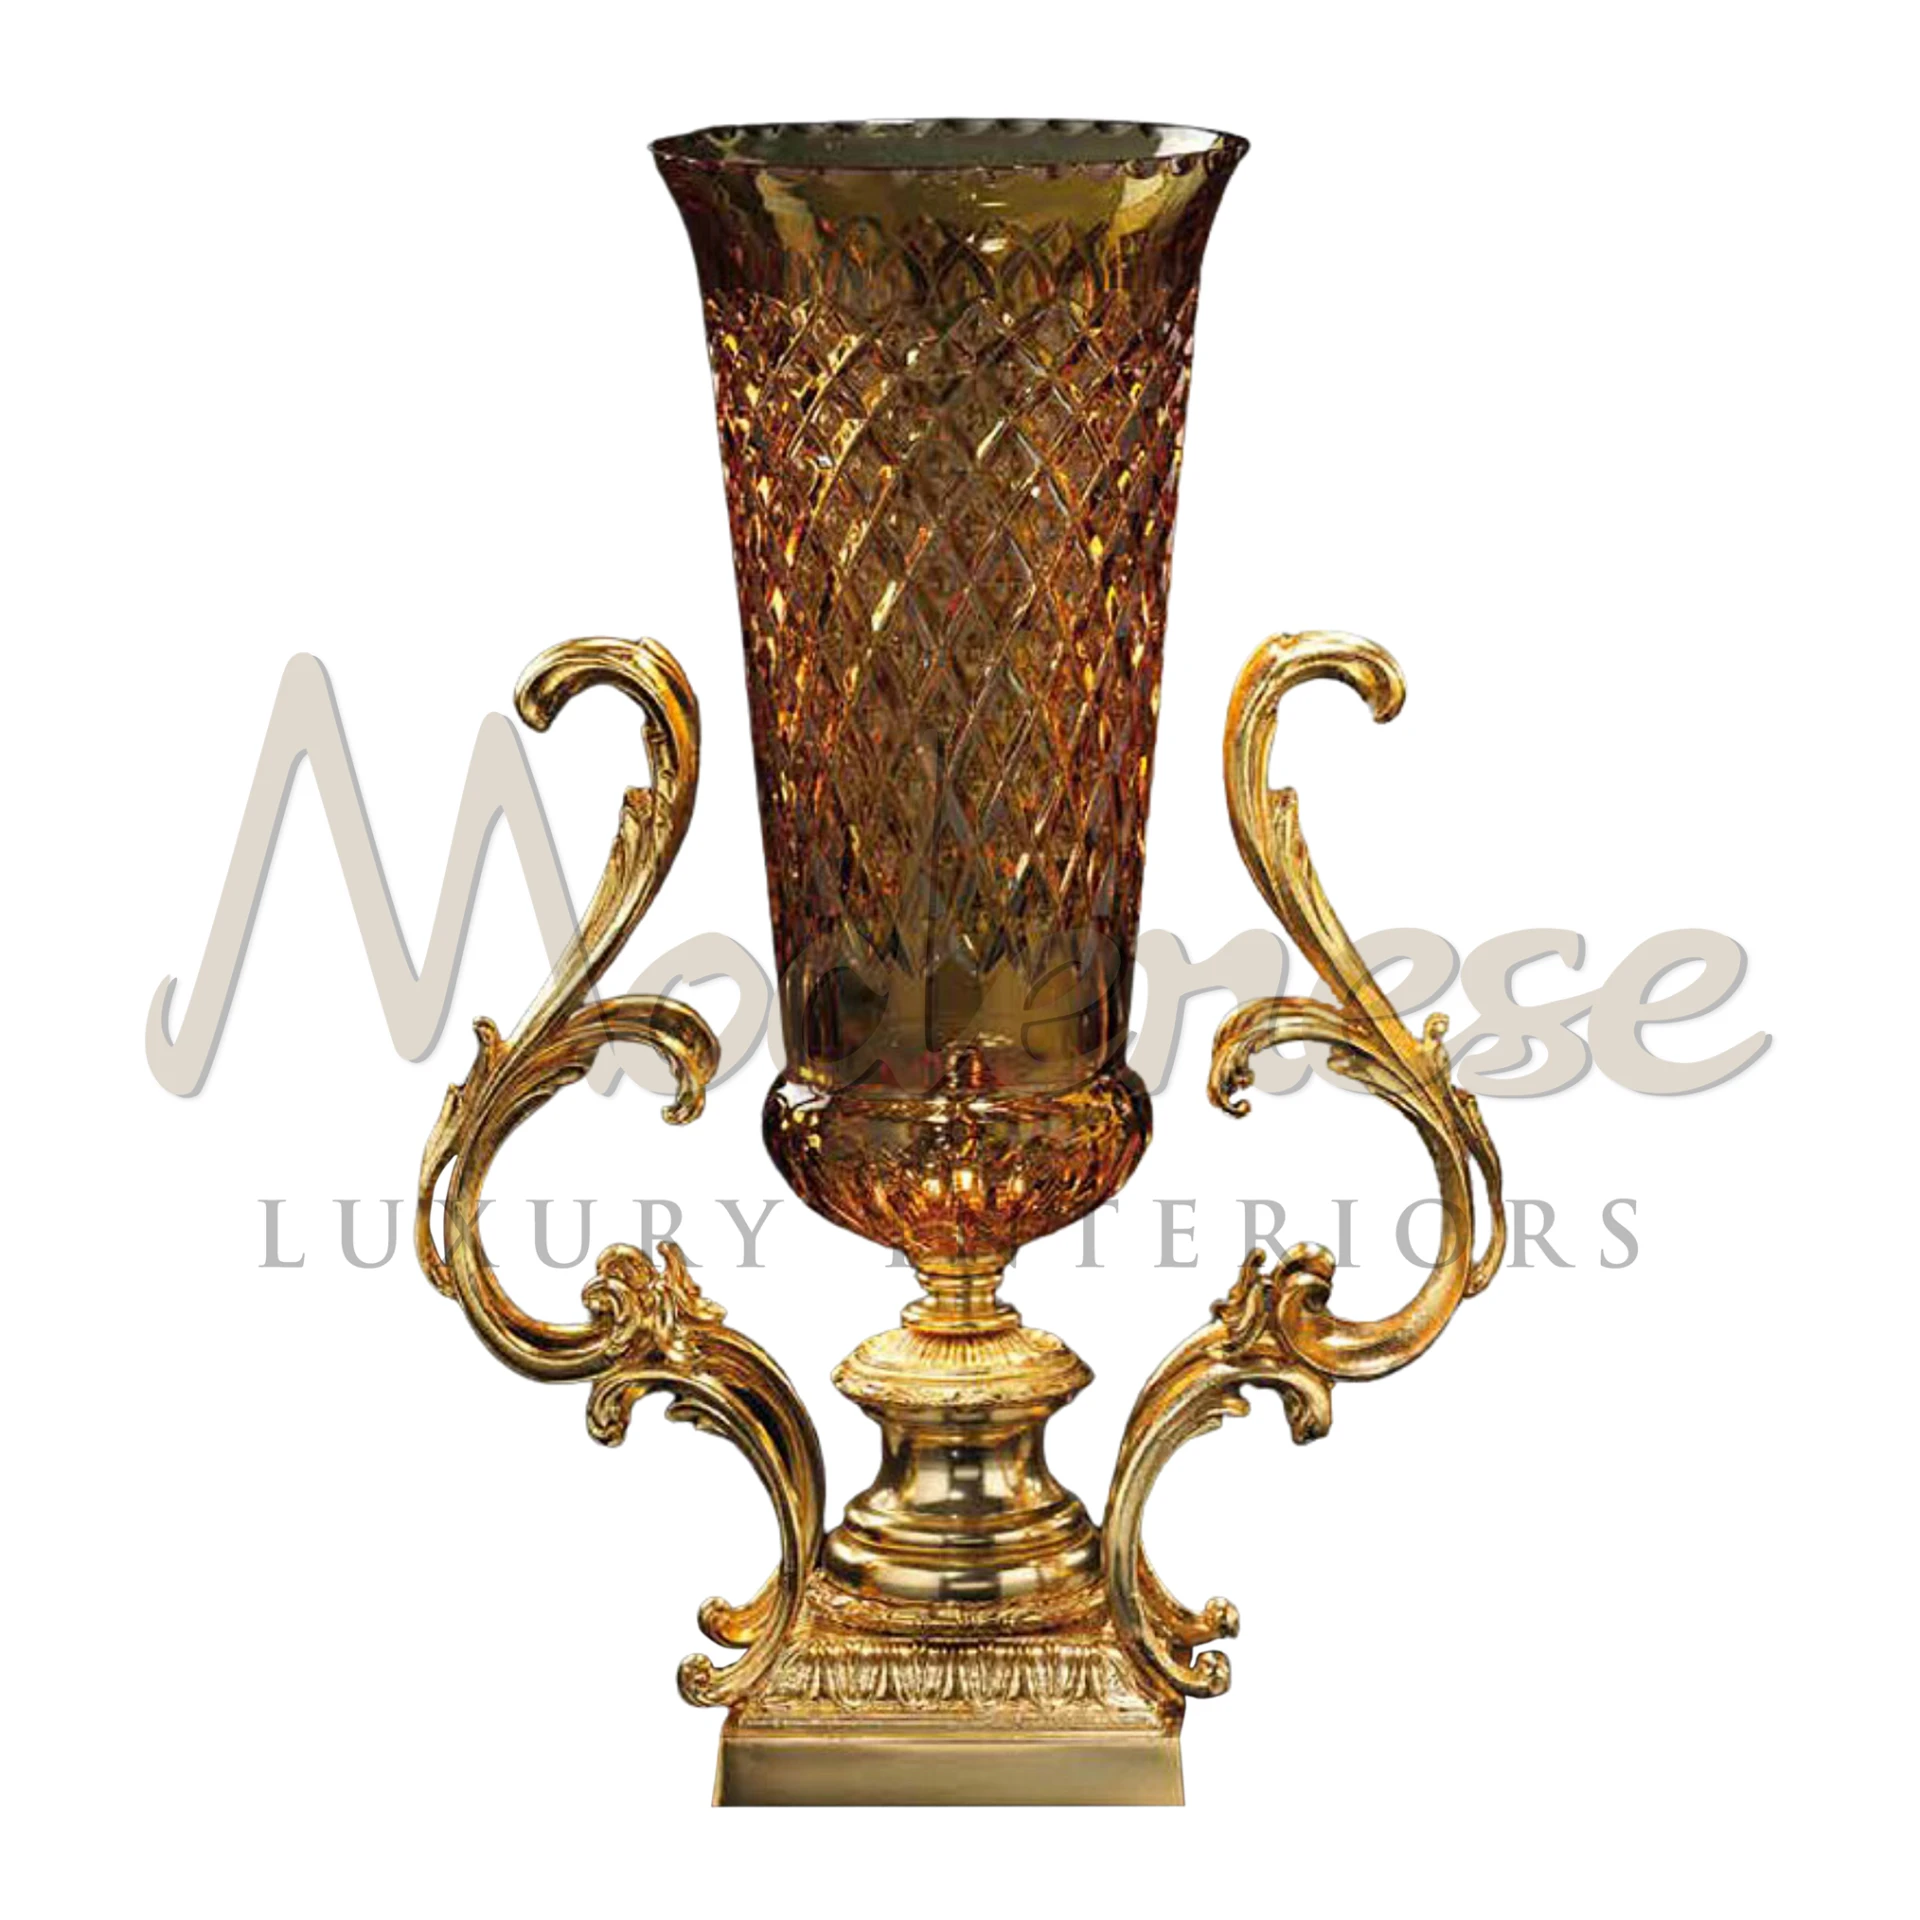 Bohemia Crystal Table Vase, Italian-crafted with intricate Art Nouveau and Art Deco designs, epitomizing luxury and style